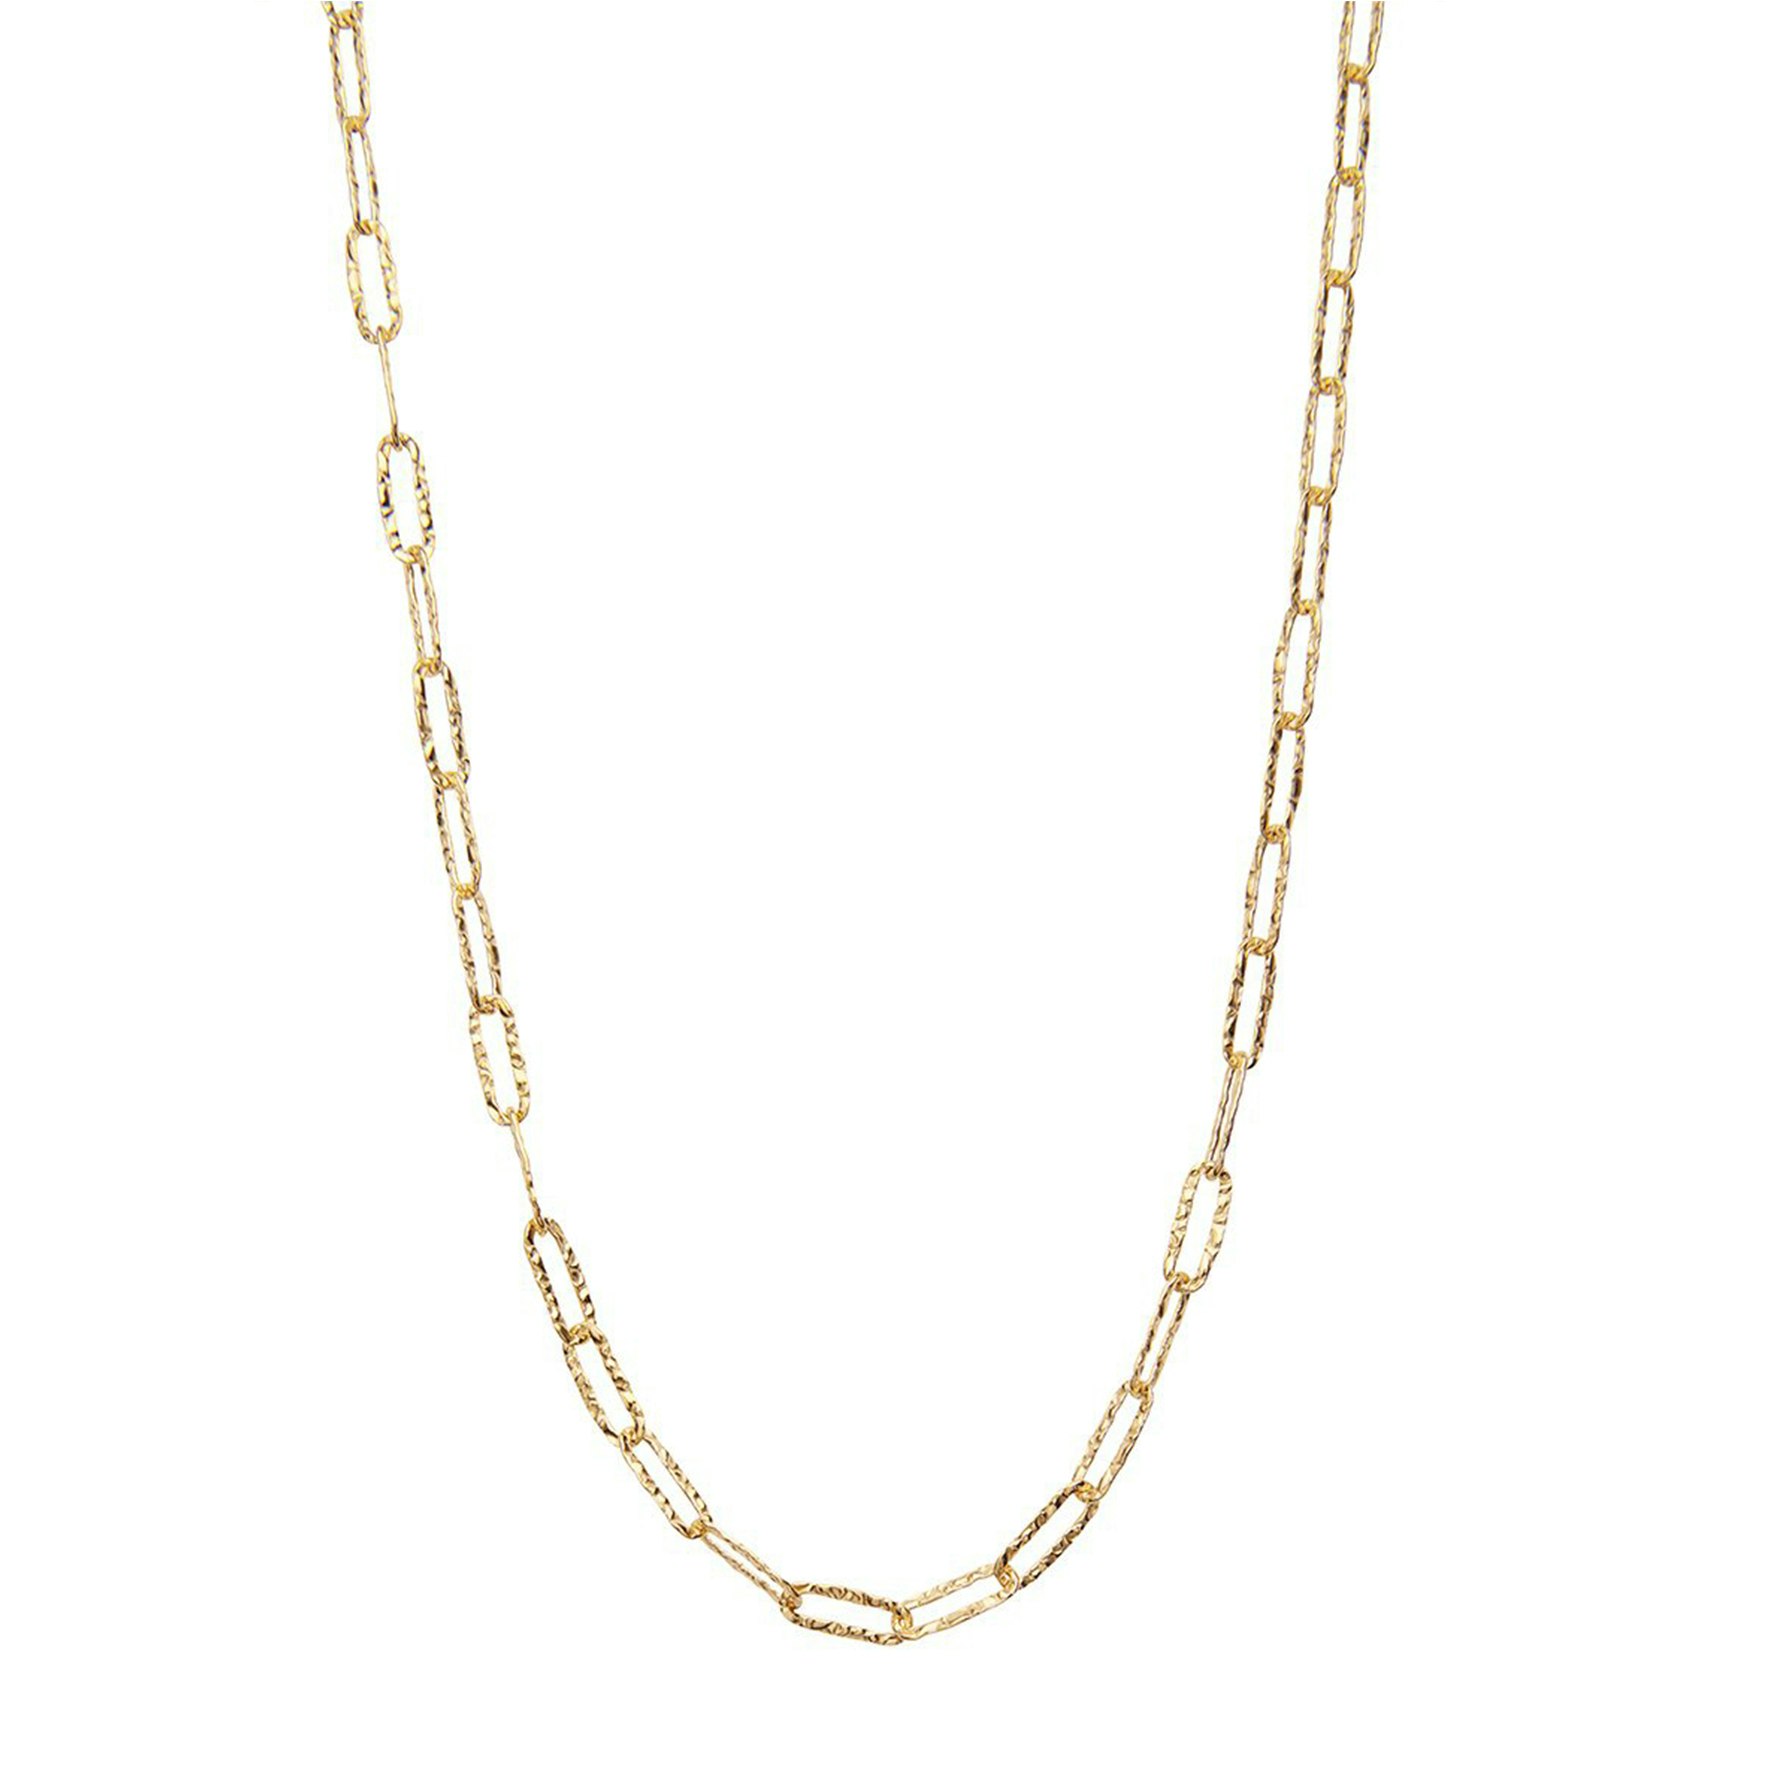 Ginny Necklace from Pico in Goldplated Brass